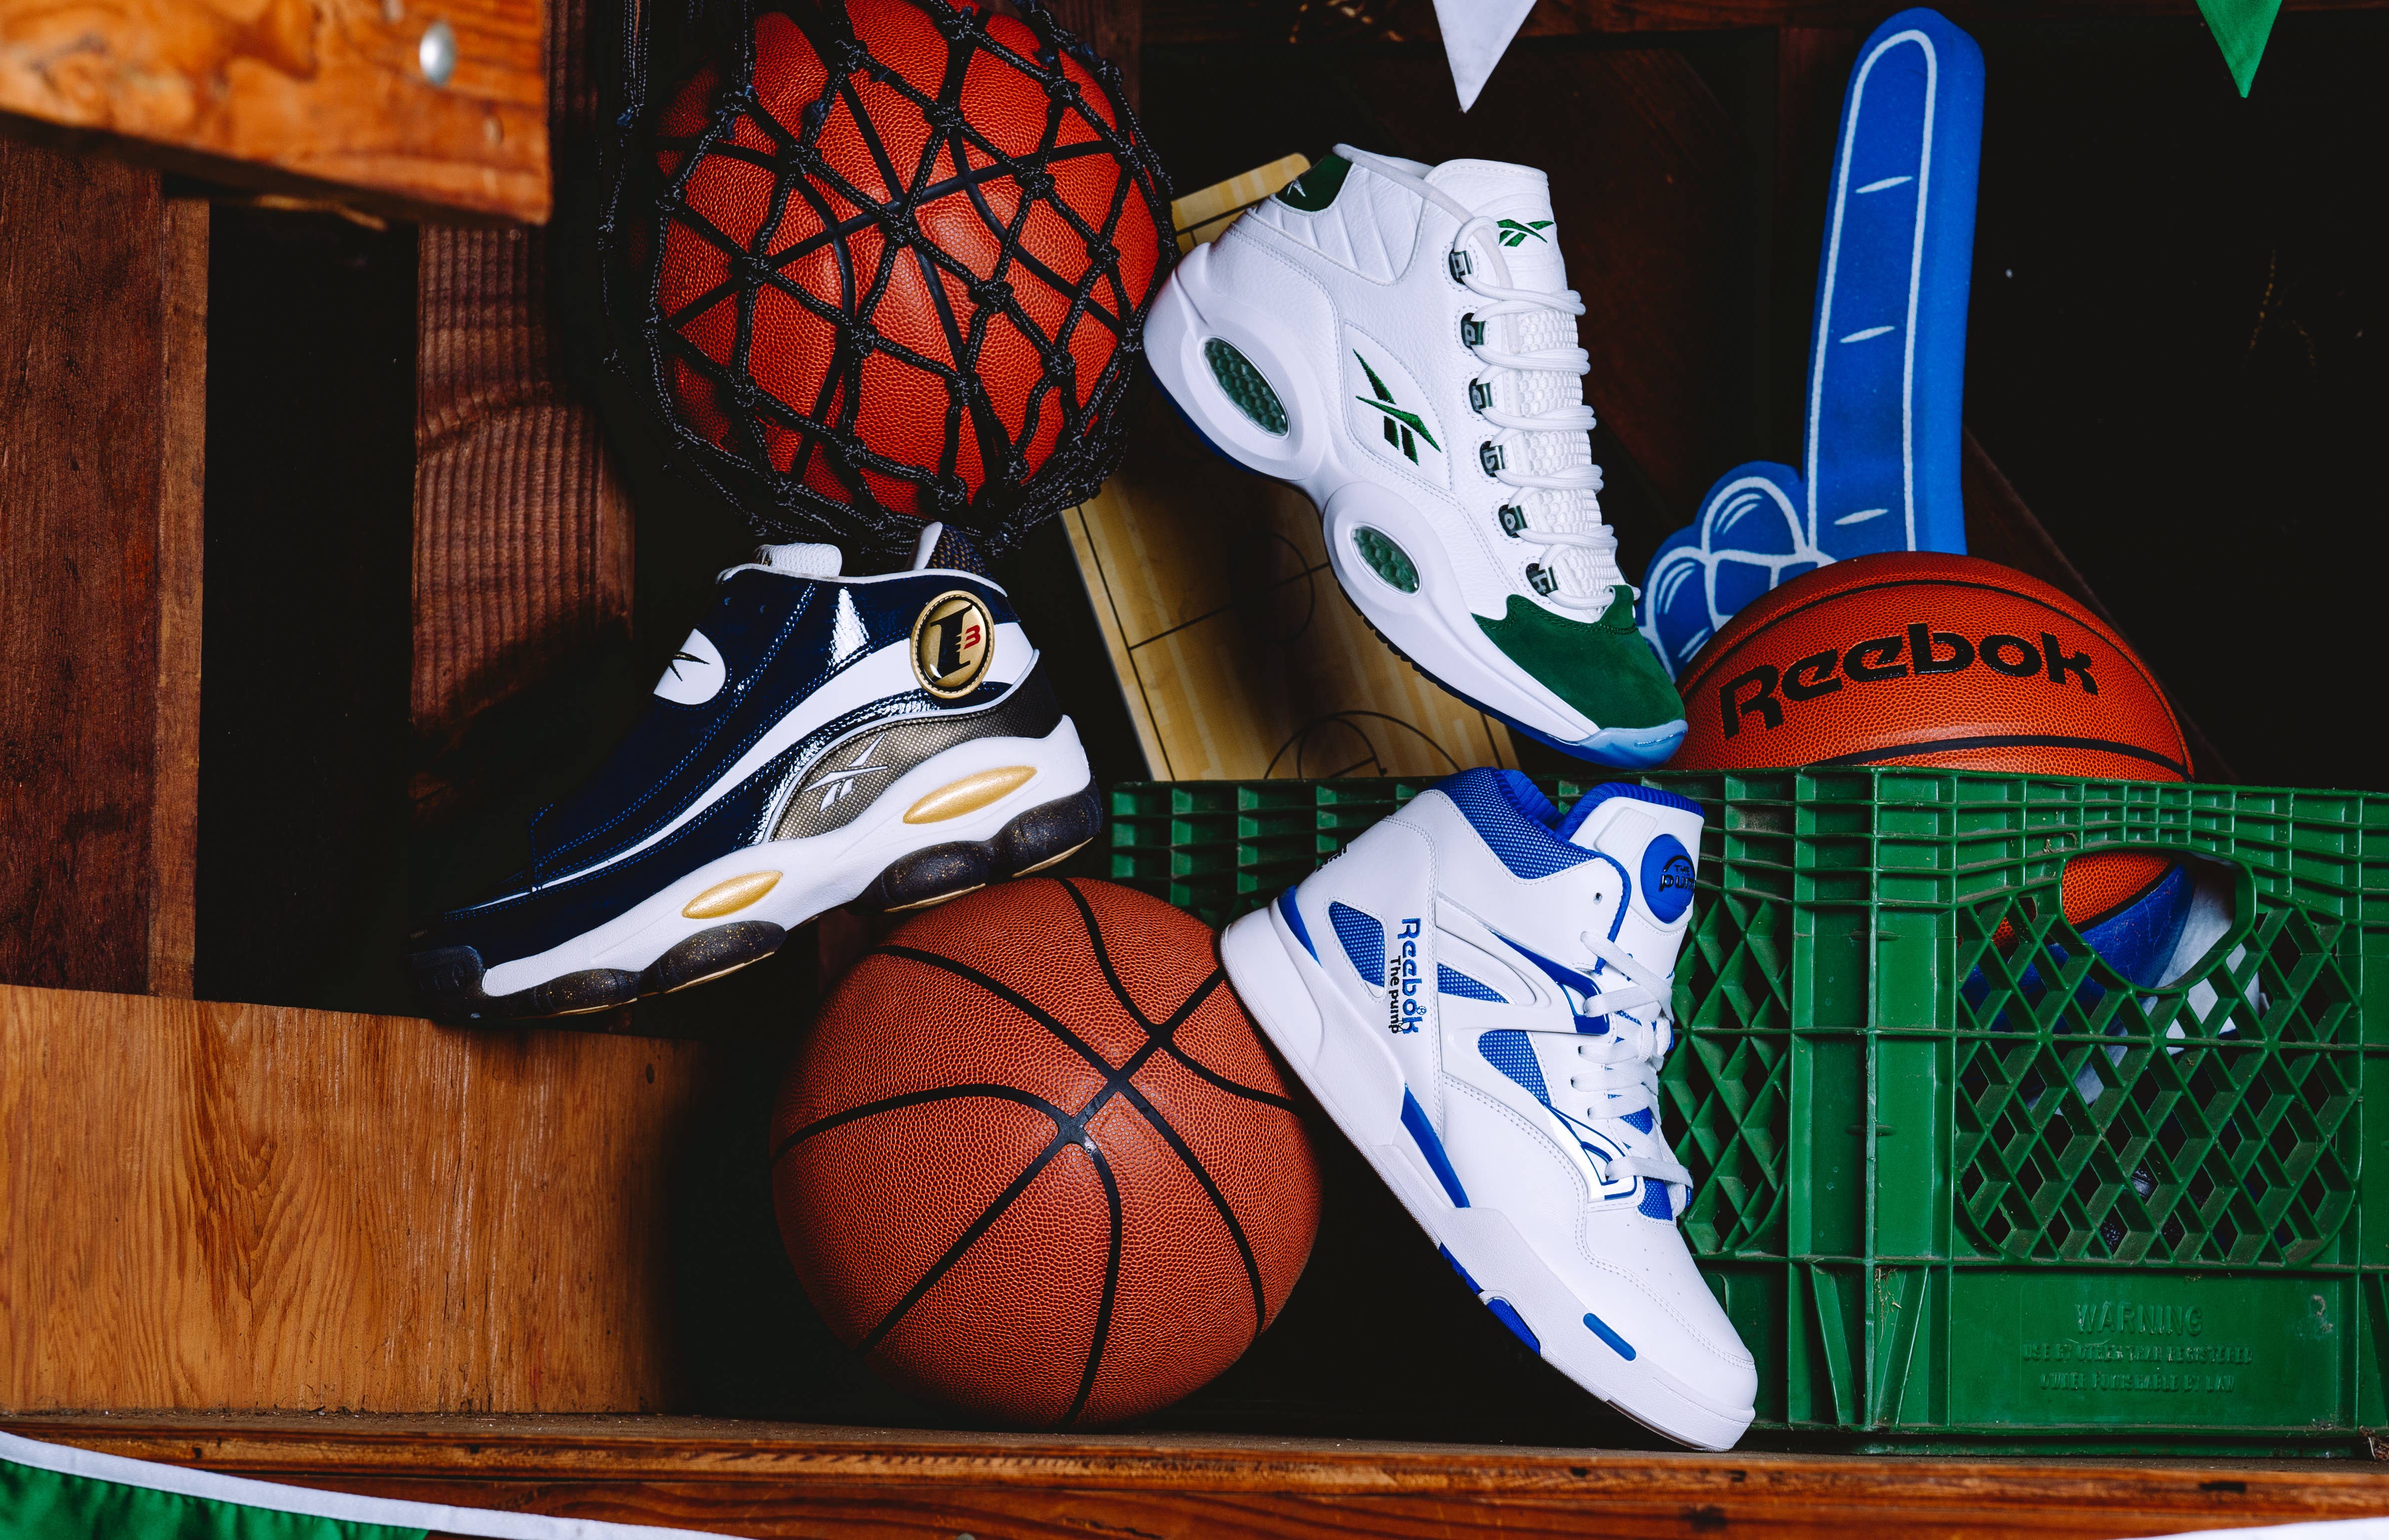 Reebok Basketball Readies a 'Collegiate Pack' for March Madness | Complex